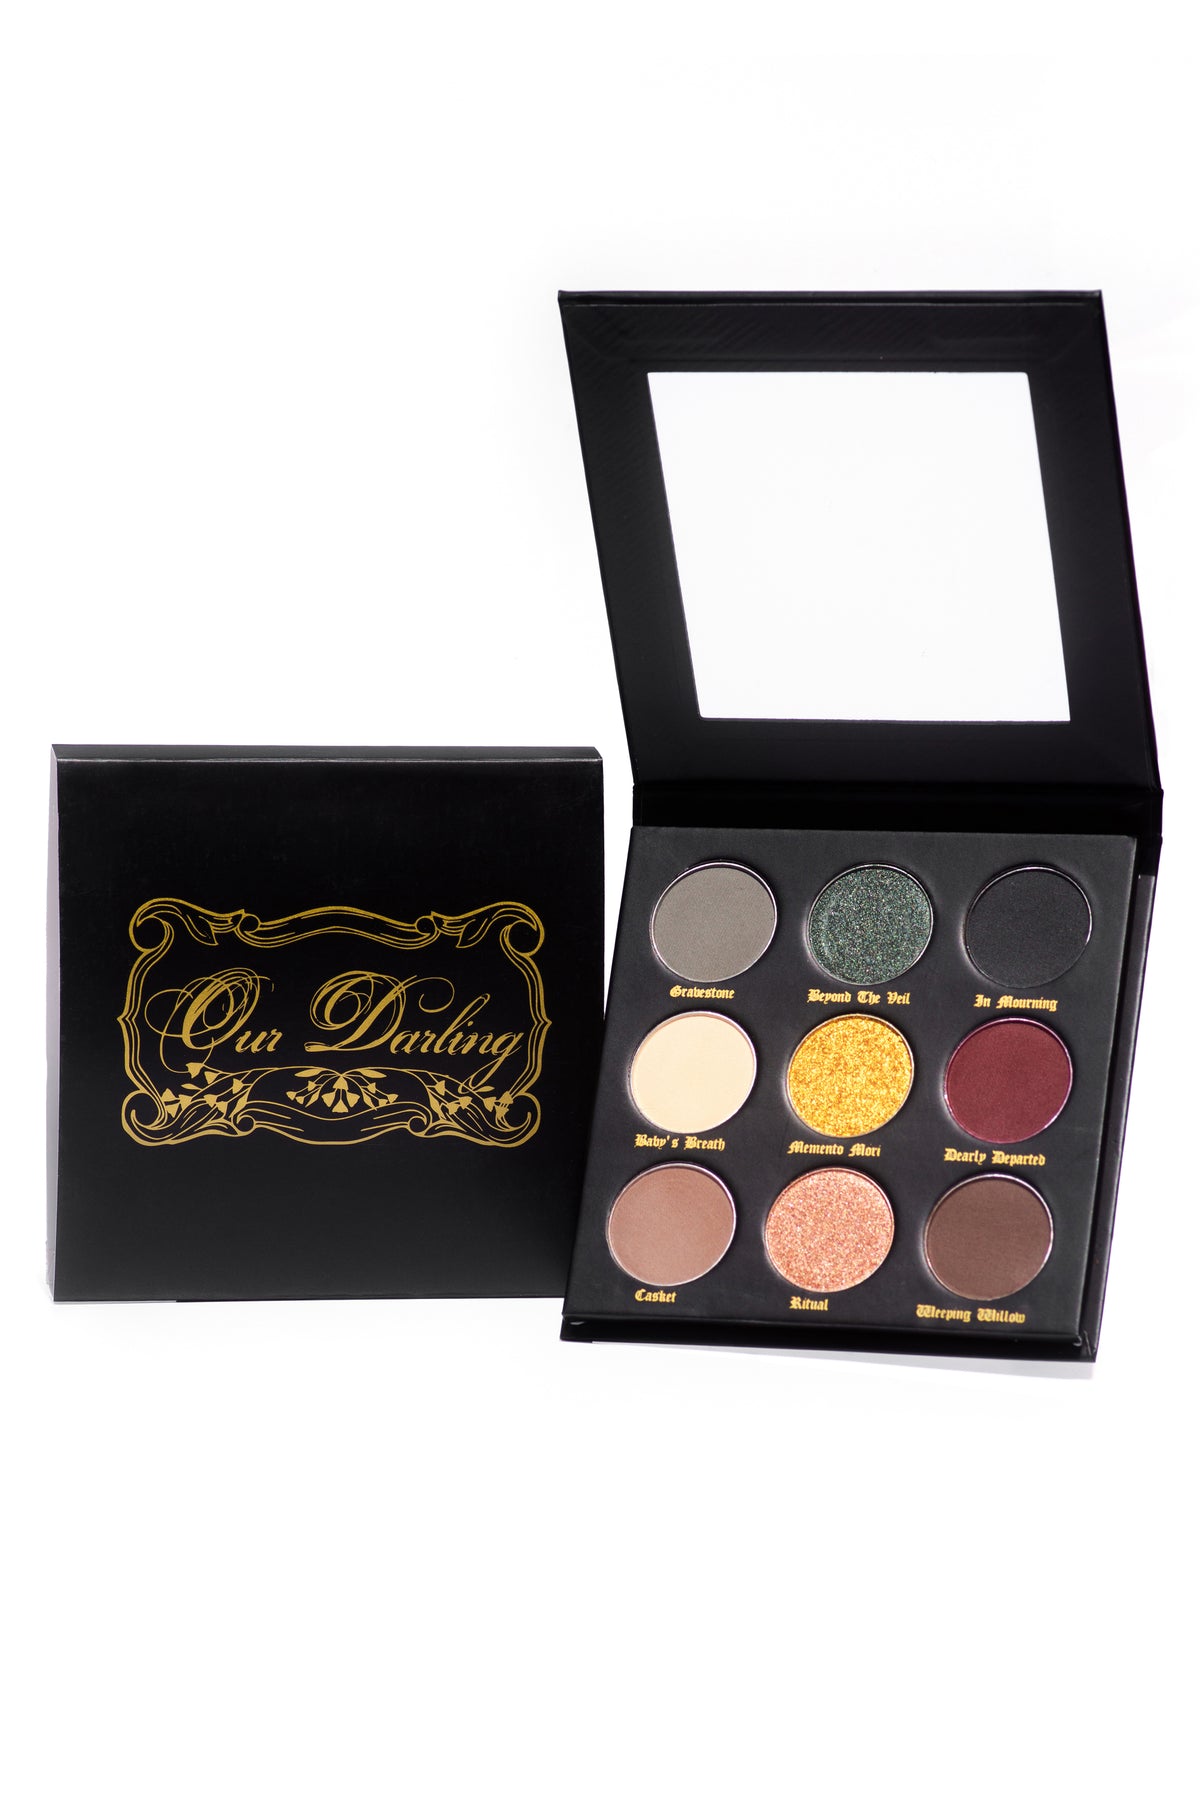 Our Darling Signature Palette